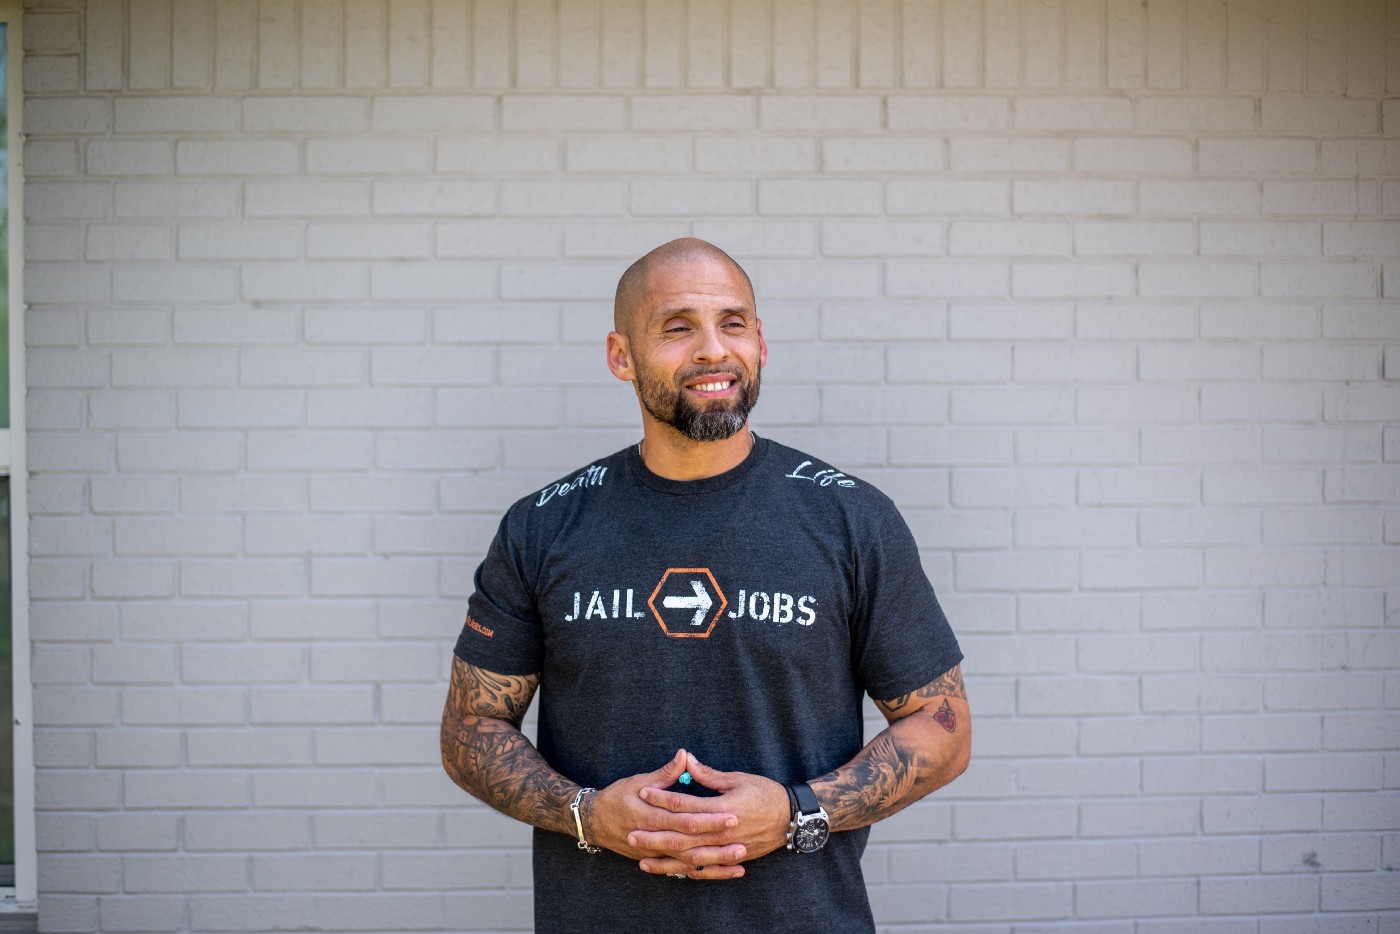 A nonprofit director who works to help previously incarcerated youth stands in front of a white brick wall.